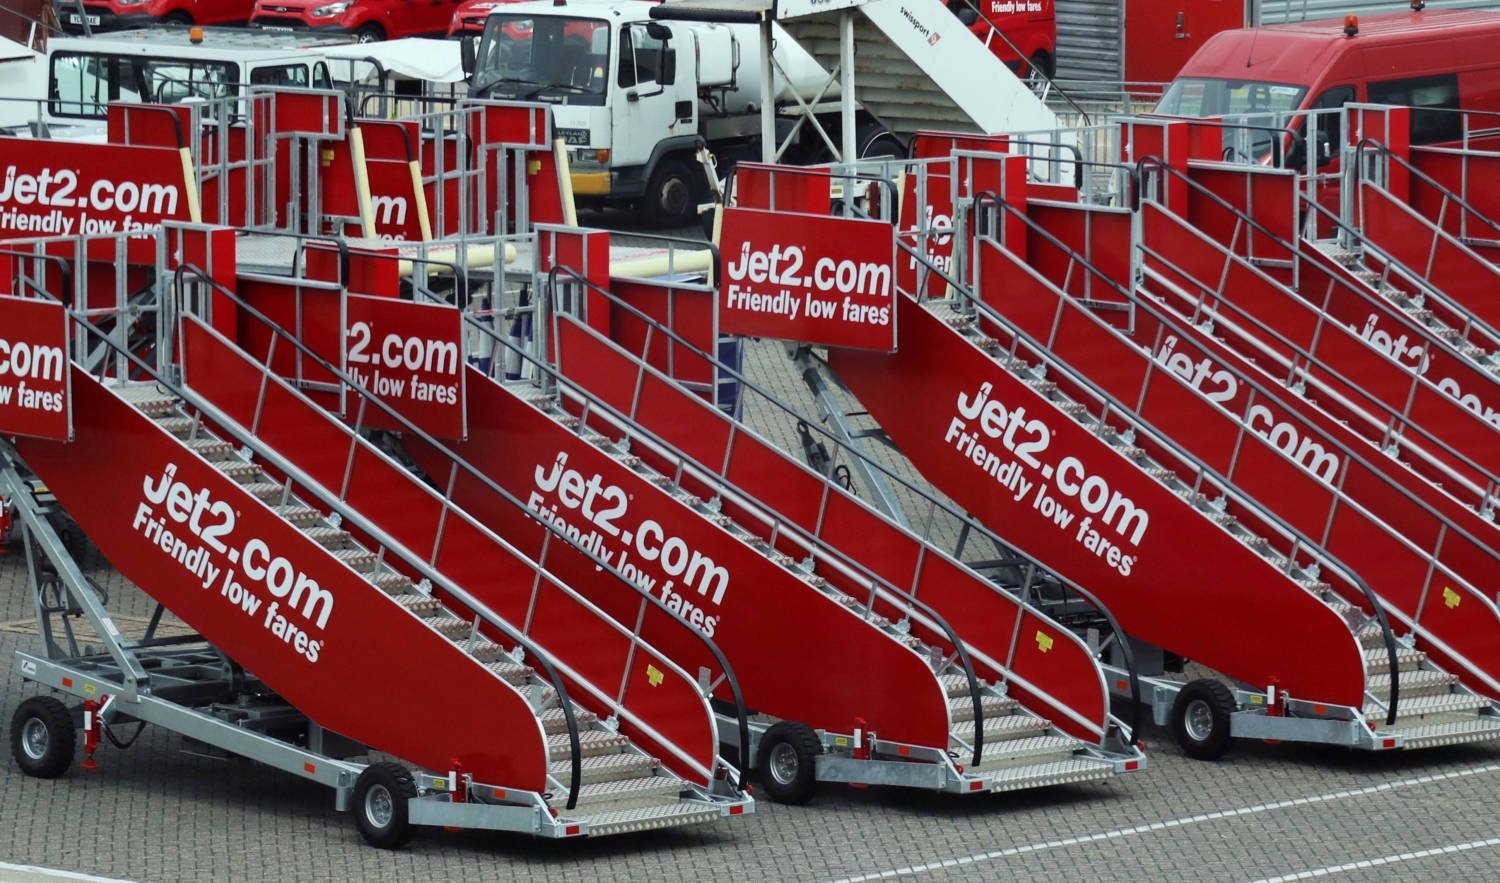 File Photo: File Photo: Jet2.com Aircraft Boarding Stairs Are Stored At Stansted Airport In Stansted, Britain